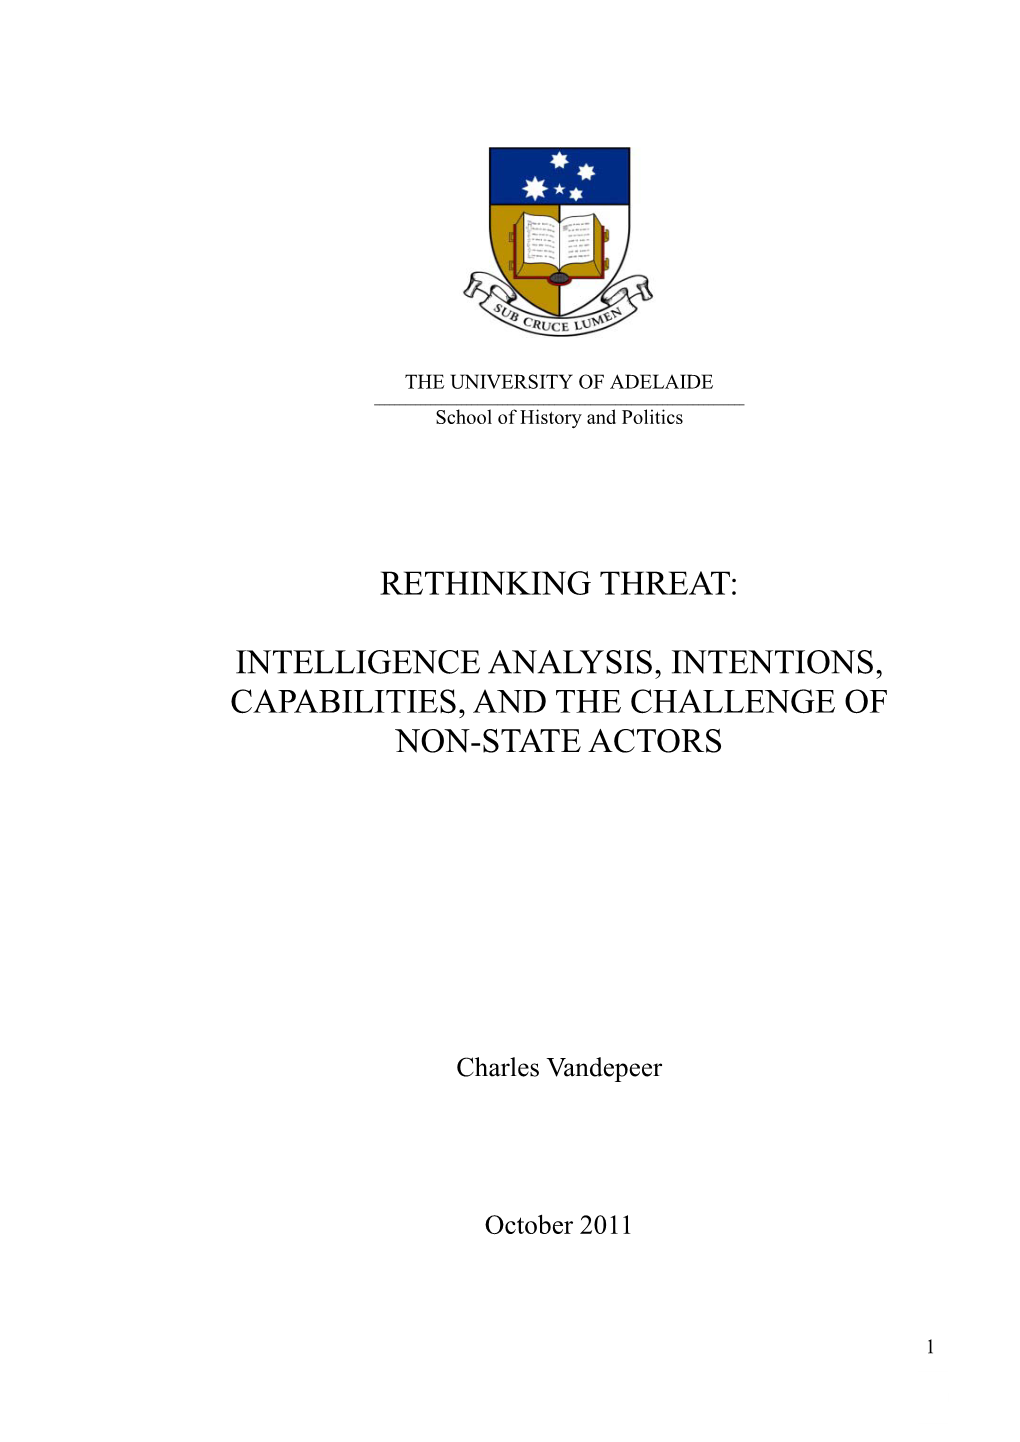 Intelligence Analysis, Intentions, Capabilities, and the Challenge of Non-State Actors